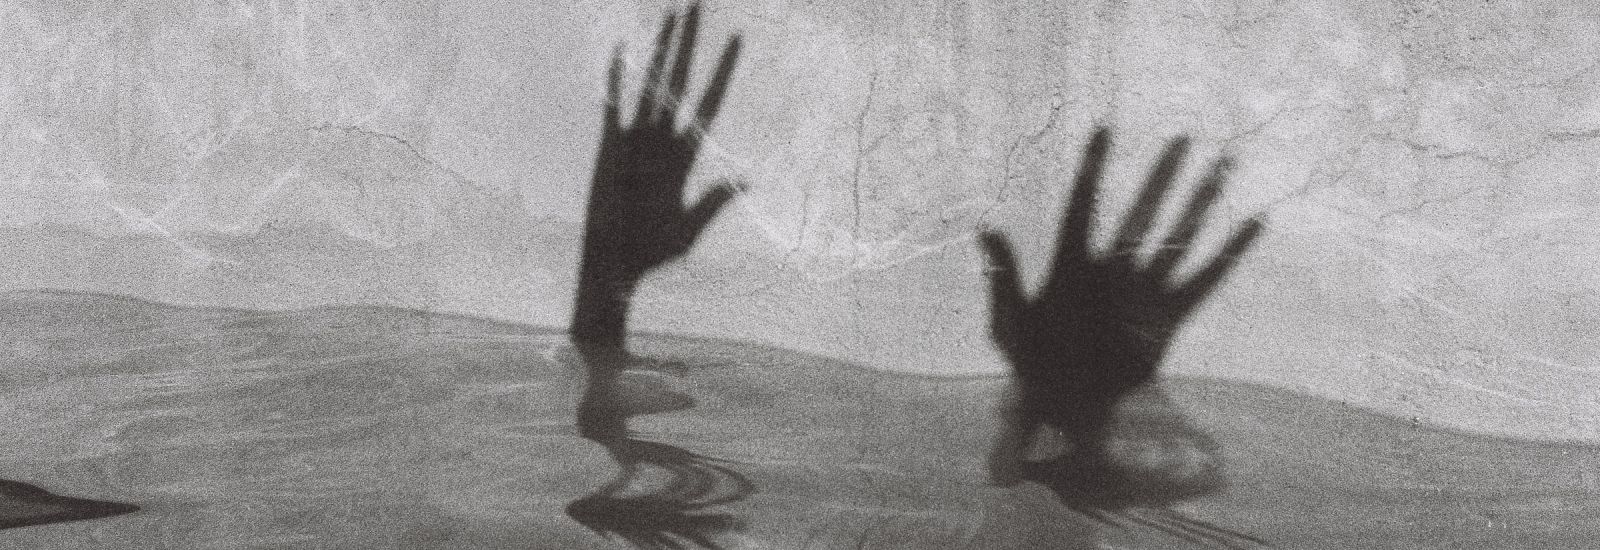 Black and white image shows pool of water with shadow on wall behind of two hands reaching out of it